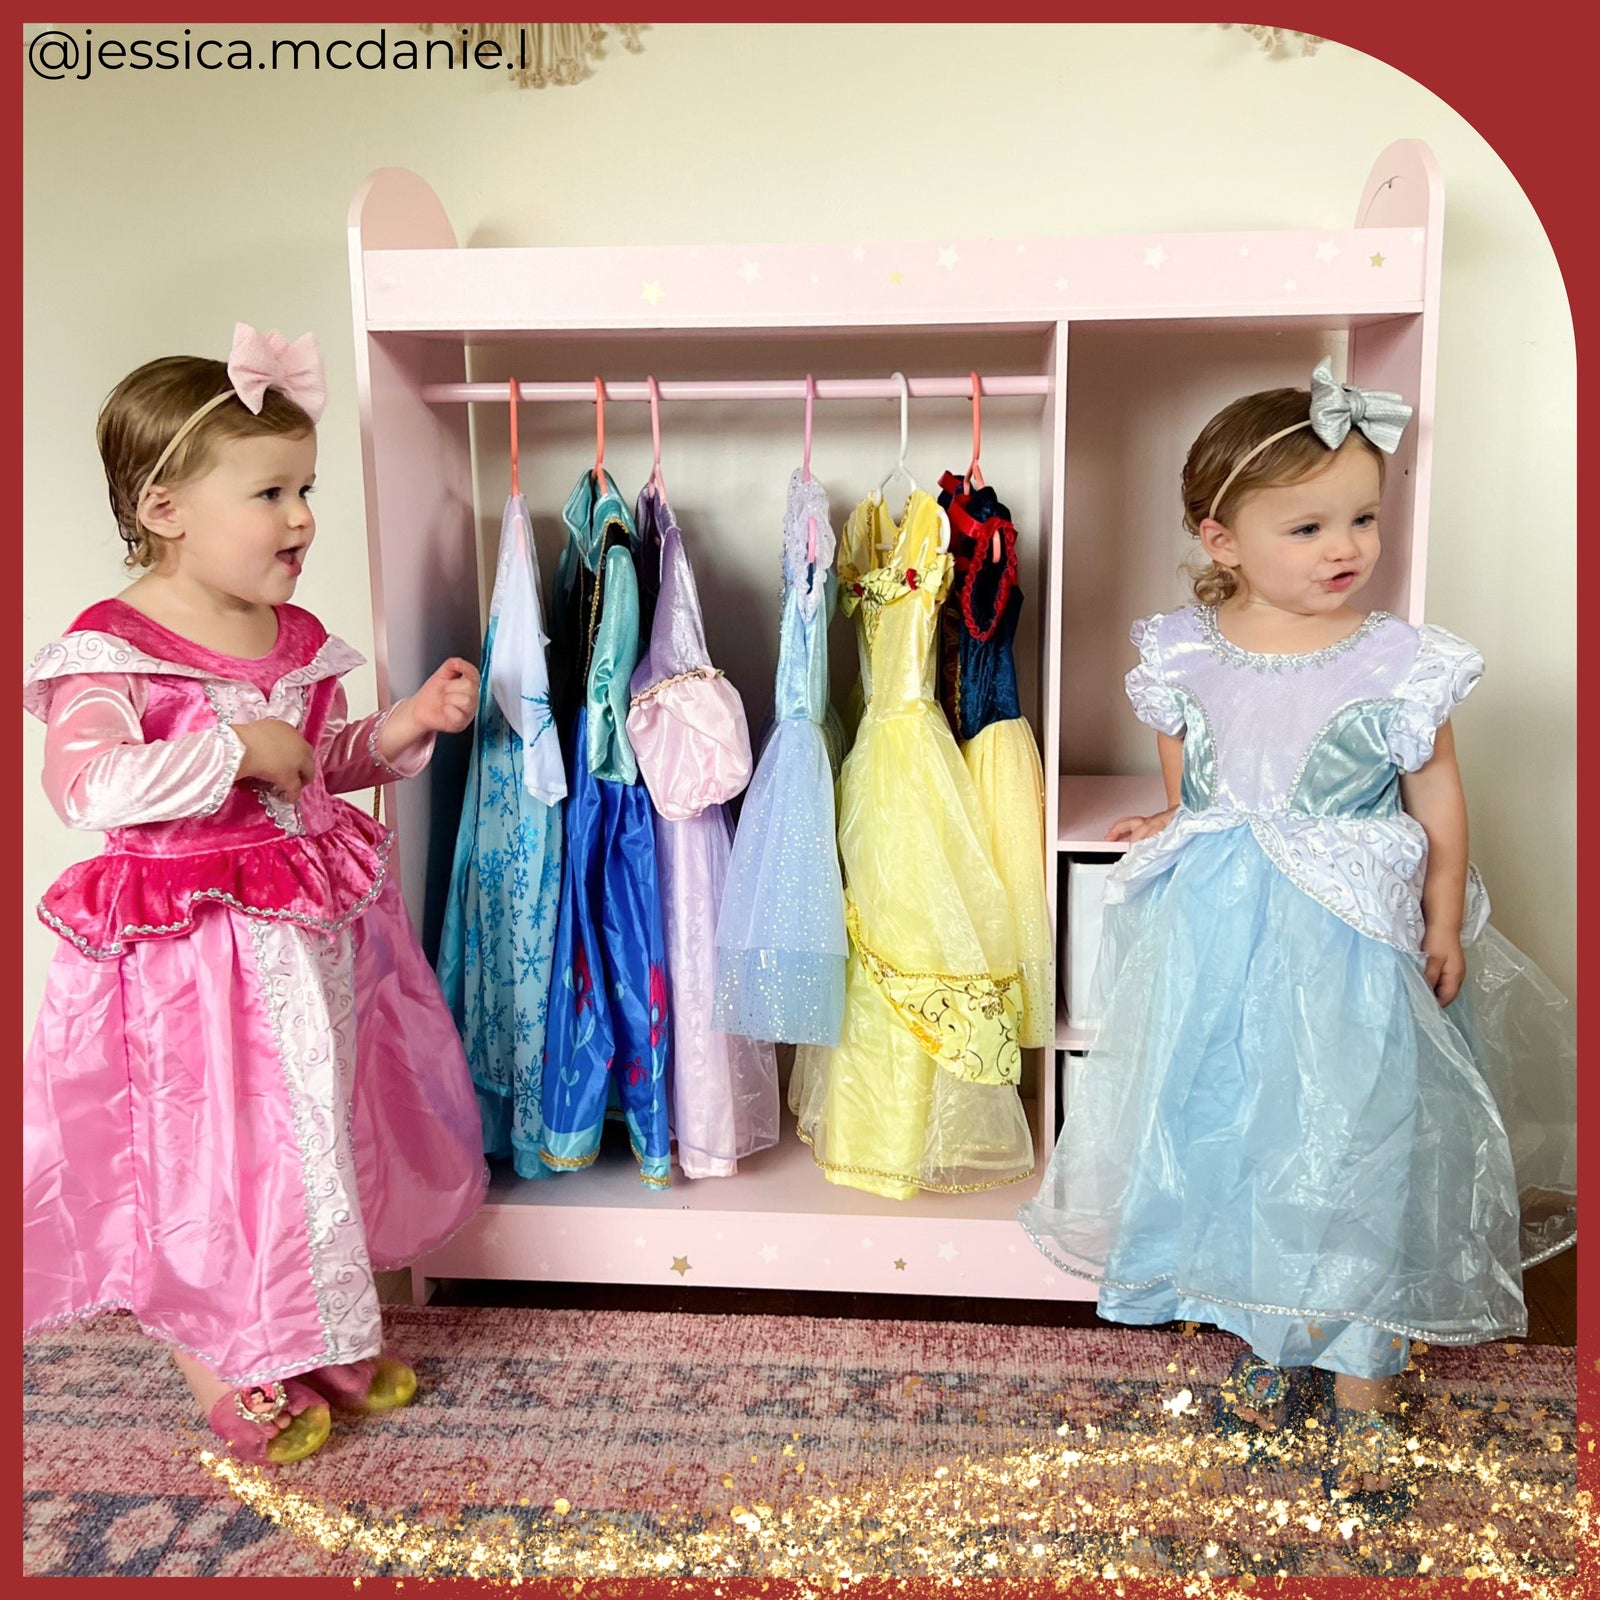 2 little girls stand in their costumes in front of a rack of other princess dress options